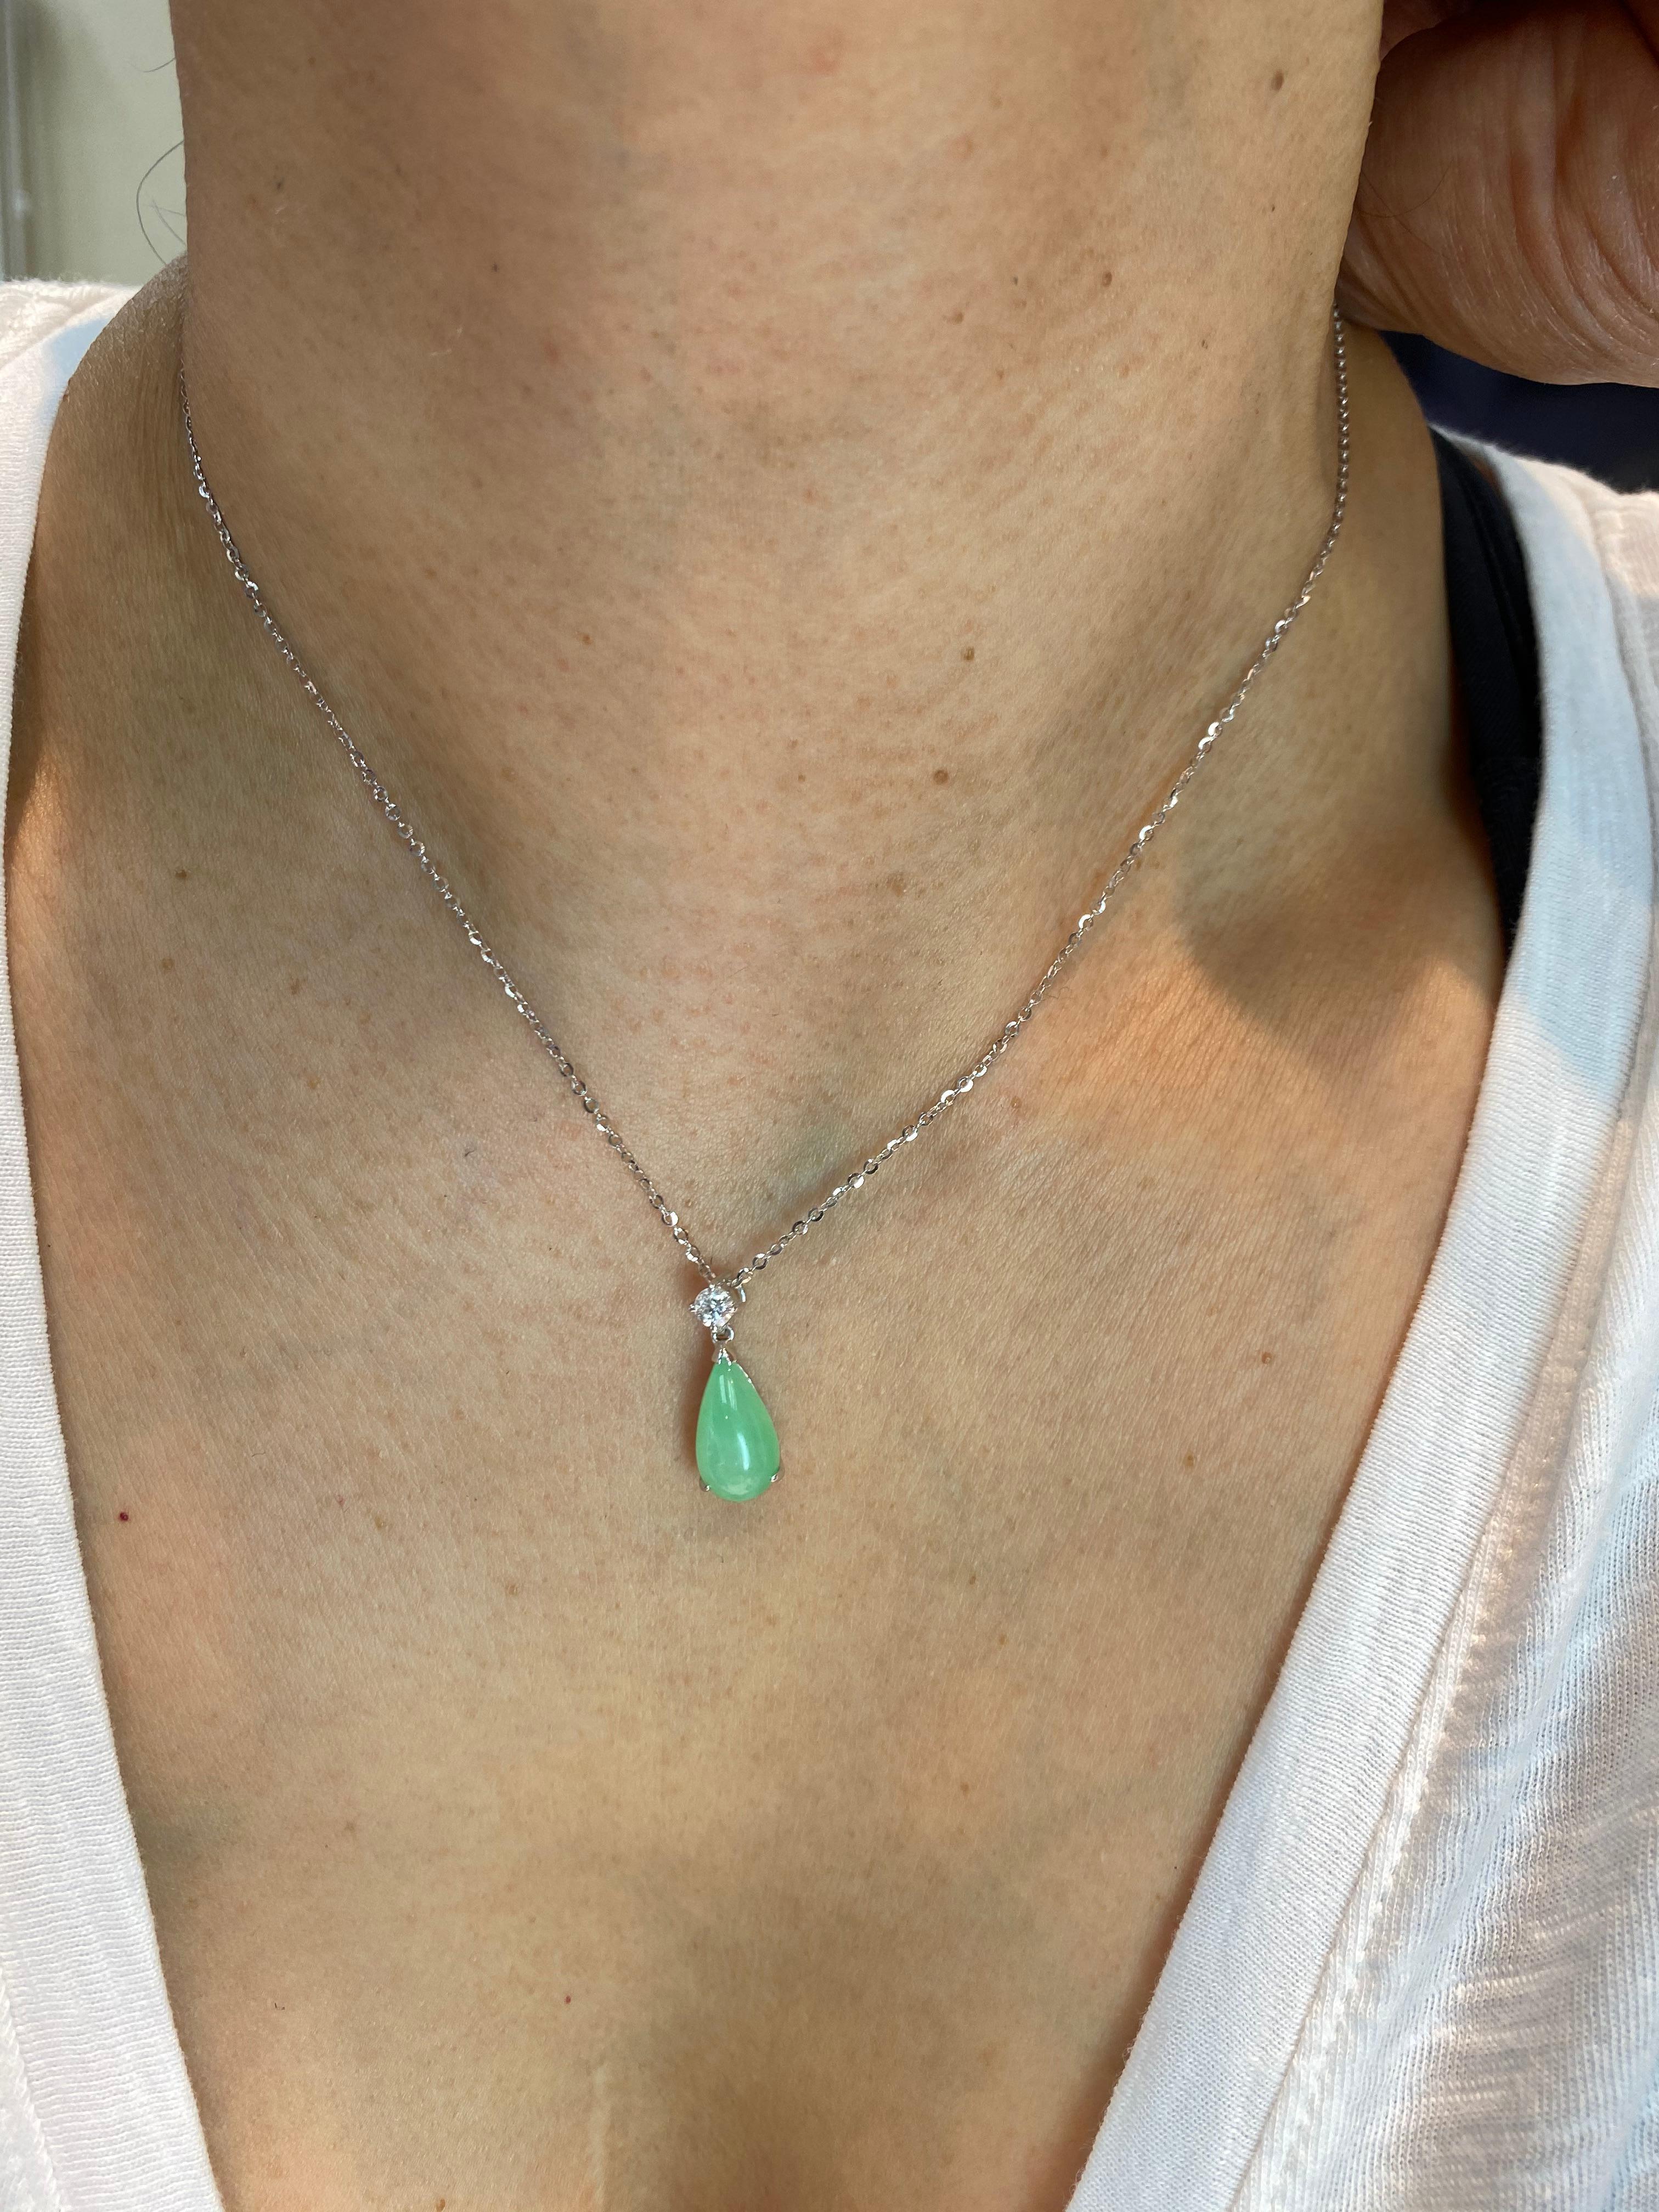 Here is a natural light green Jade and diamond pendant. It is certified. The pendant is set in 18k white gold and diamonds. There is one diamond weighing 0.17 cts set on top of the pear-shaped cabochon (tear drop) green jade. The untreated /